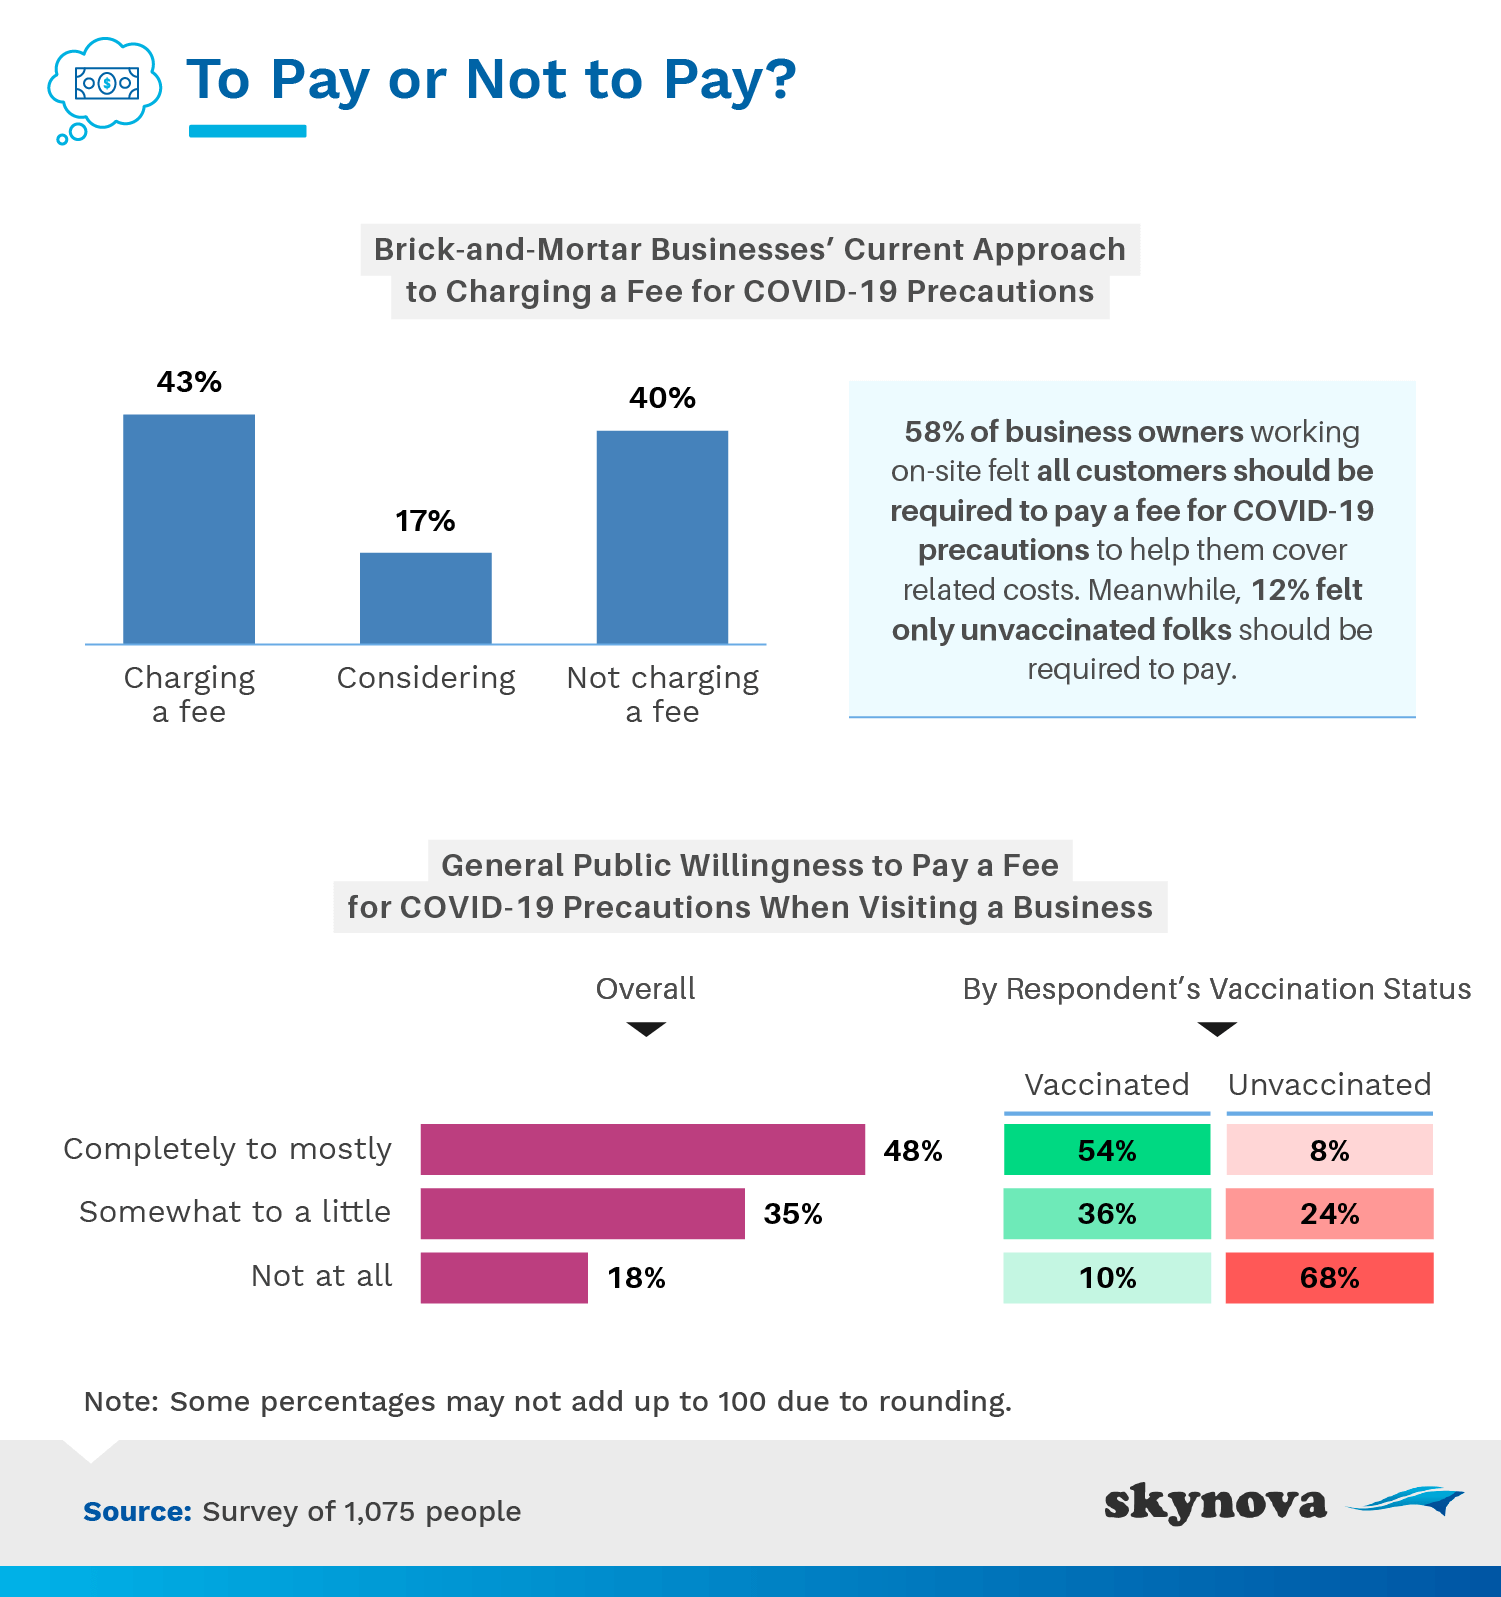 To pay or not to pay?